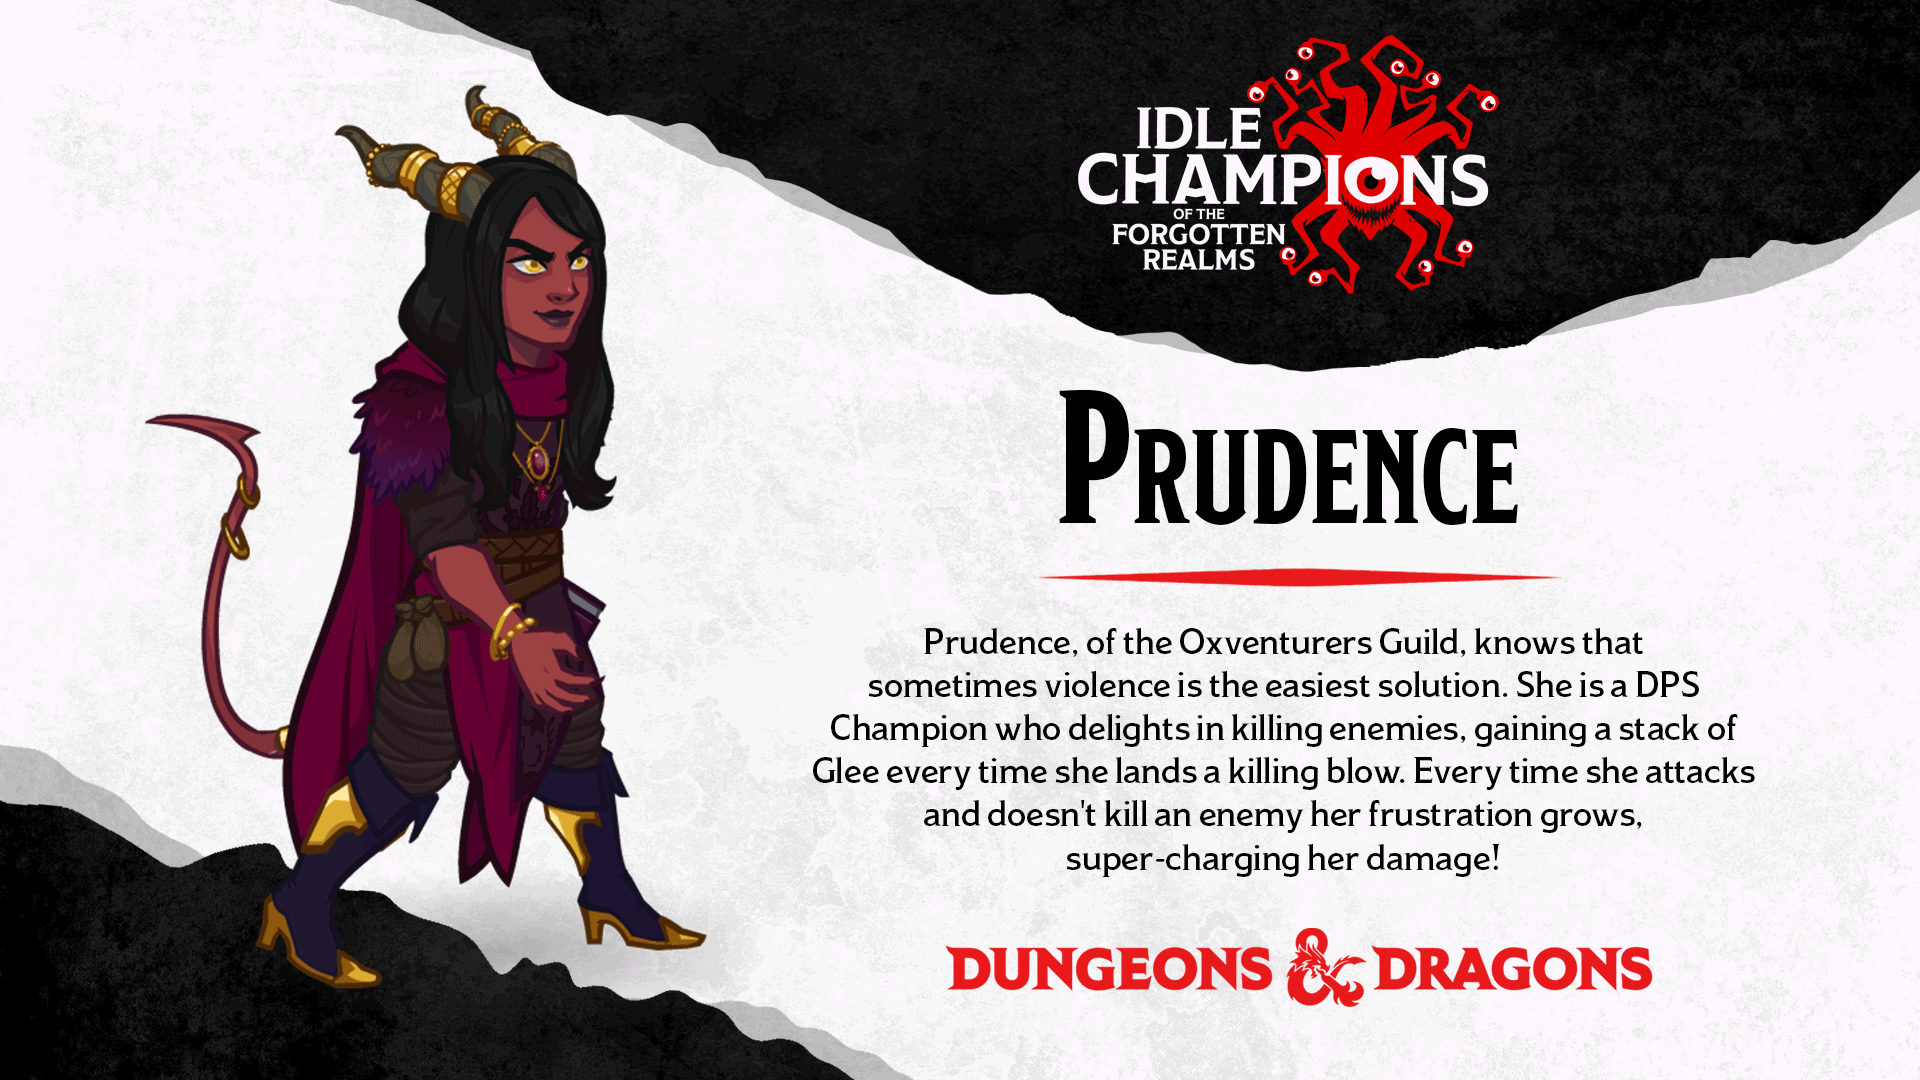 Dungeons & Dragons Oxventures Prudence